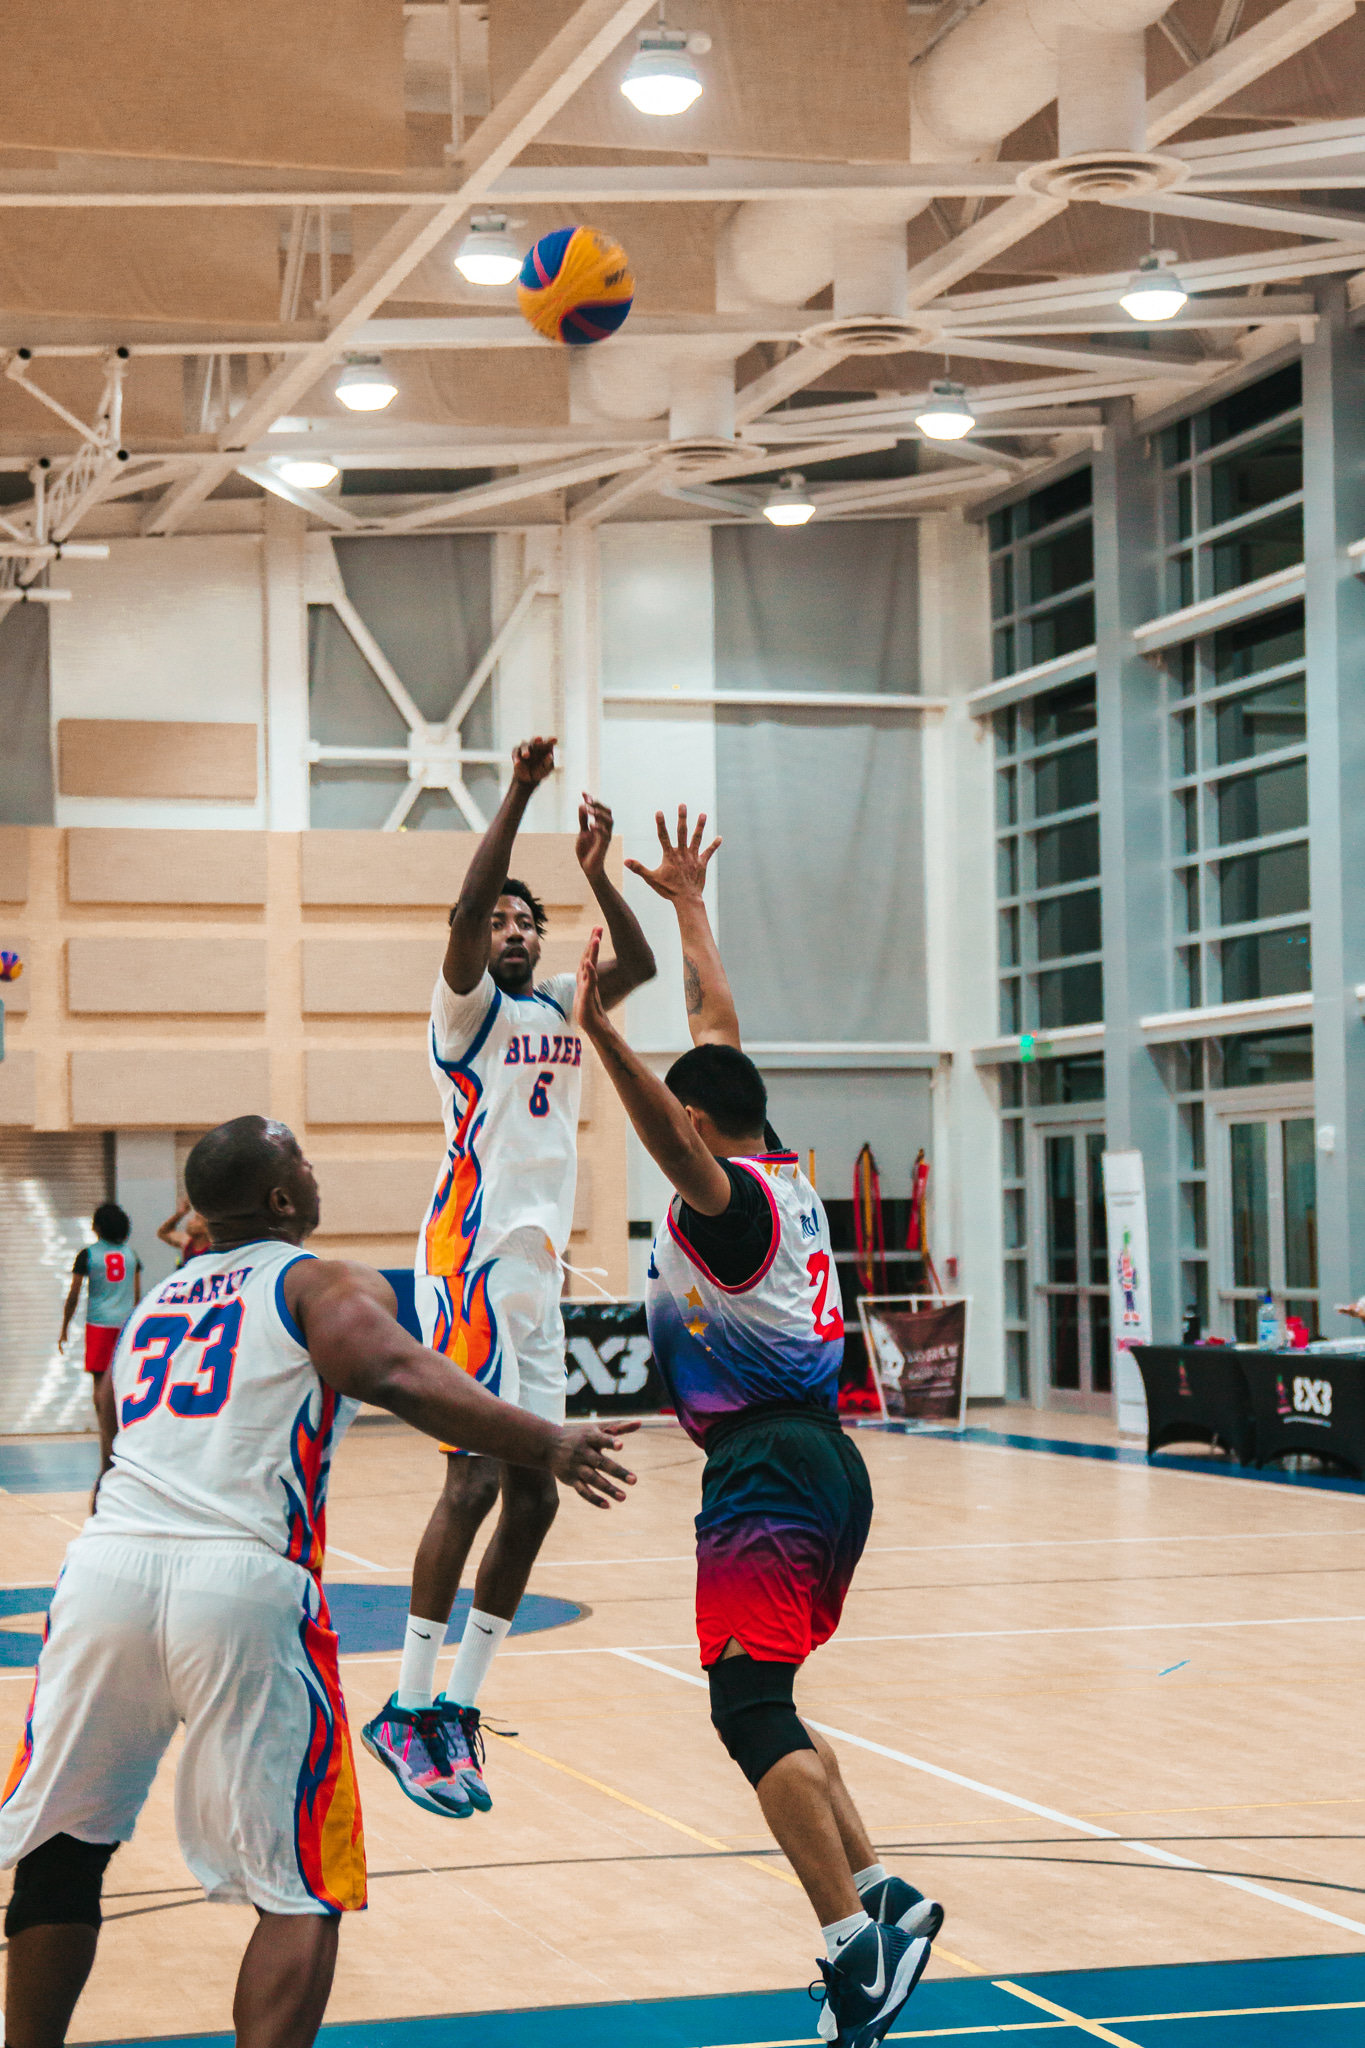 Cayman Islands Basketball Association The Home Of Basketball in The